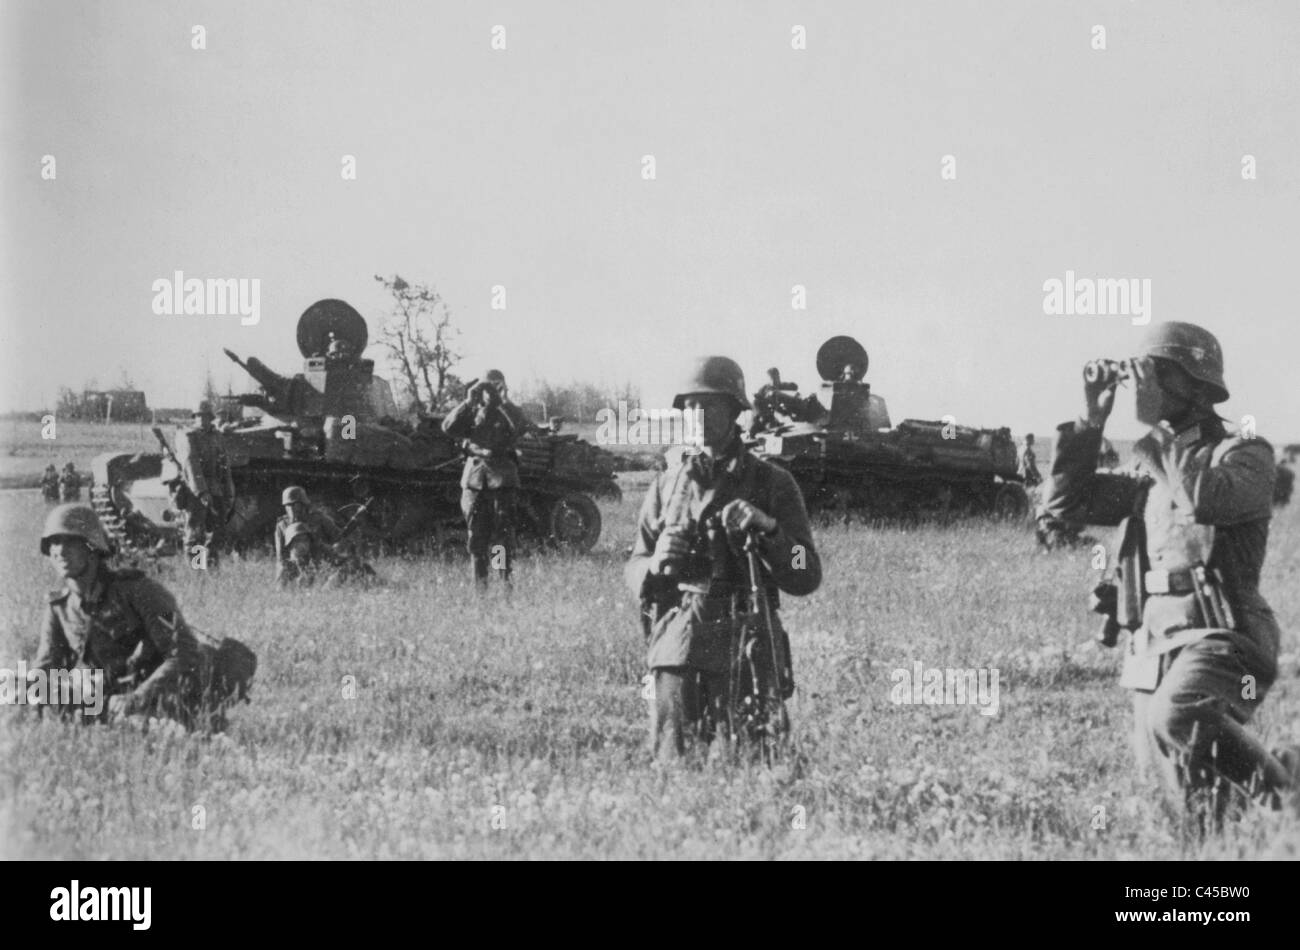 Nazi German soldiers and tanks on the Eastern front, 1941 Stock Photo